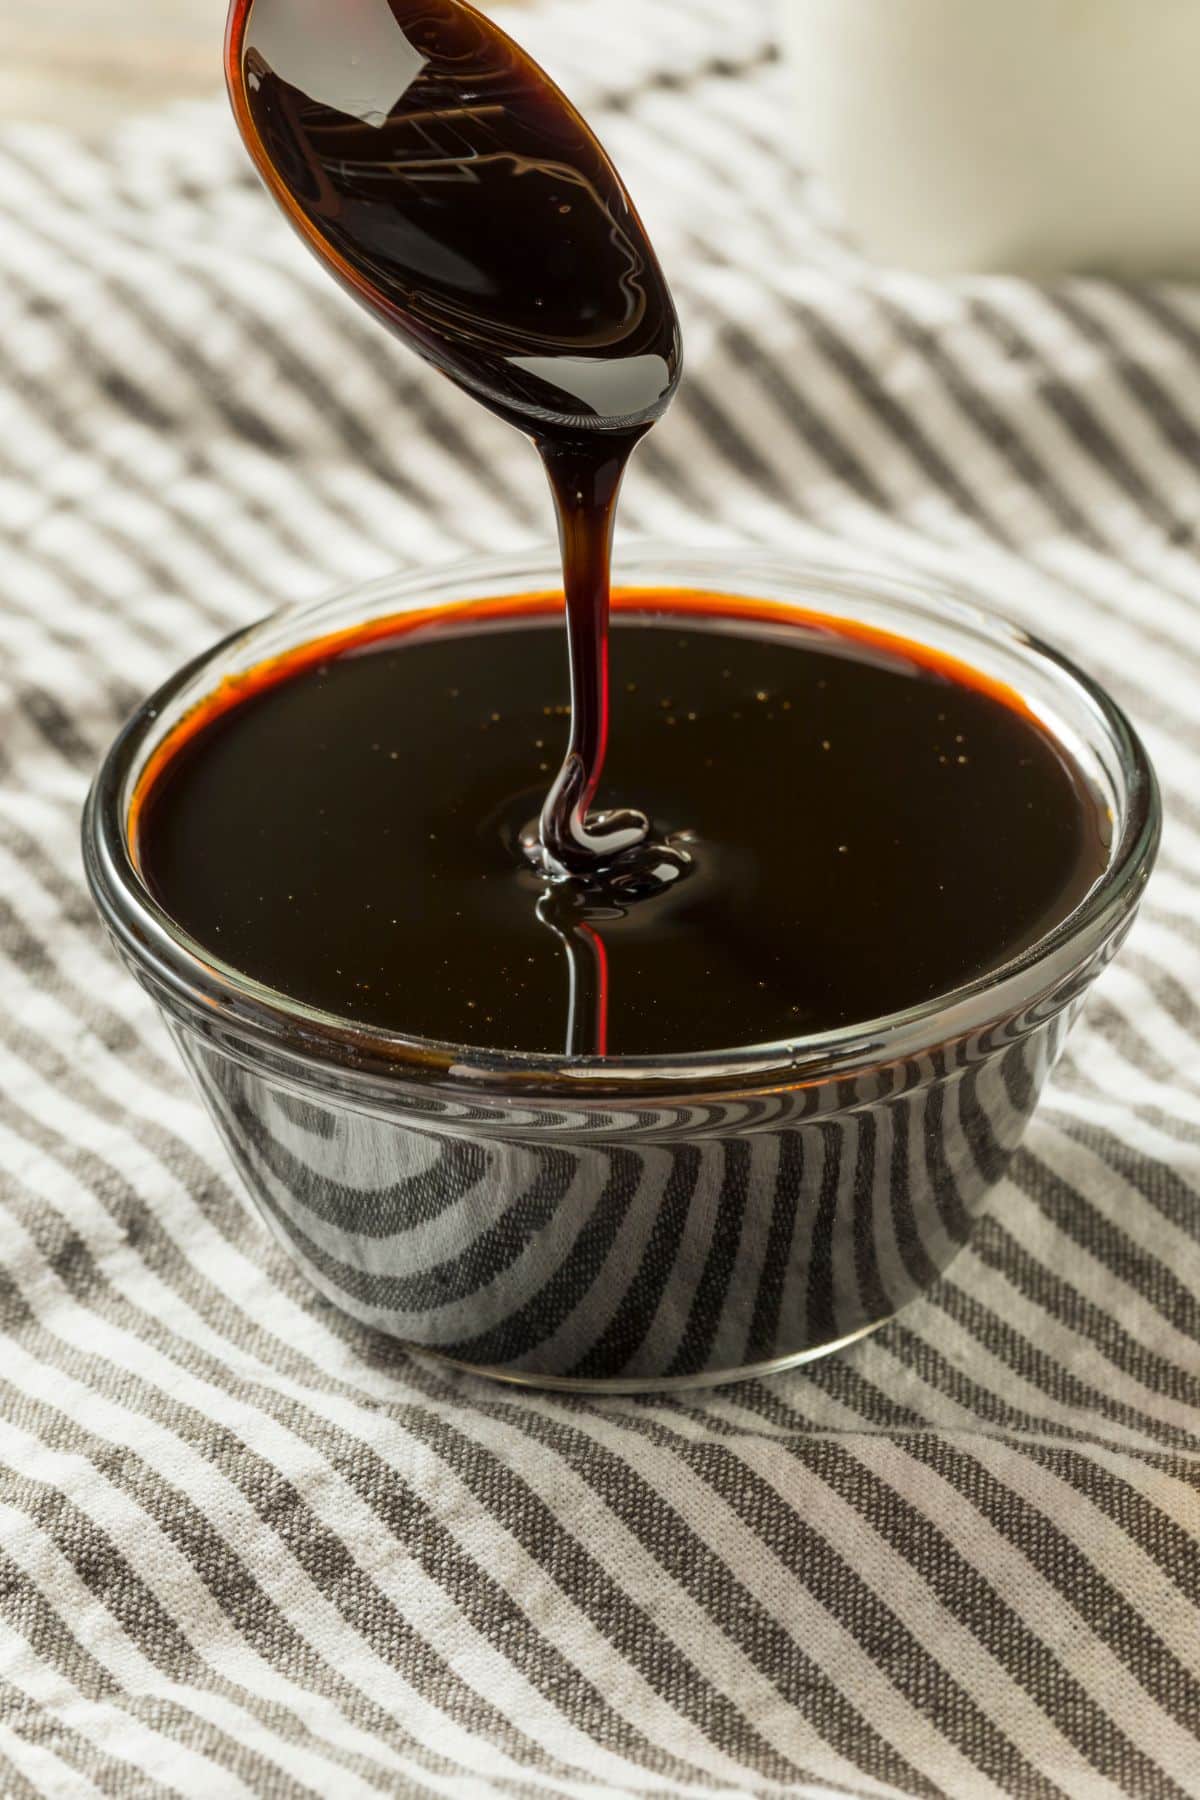 Molasses pouring into clear bowl on patterned kitchen towel.